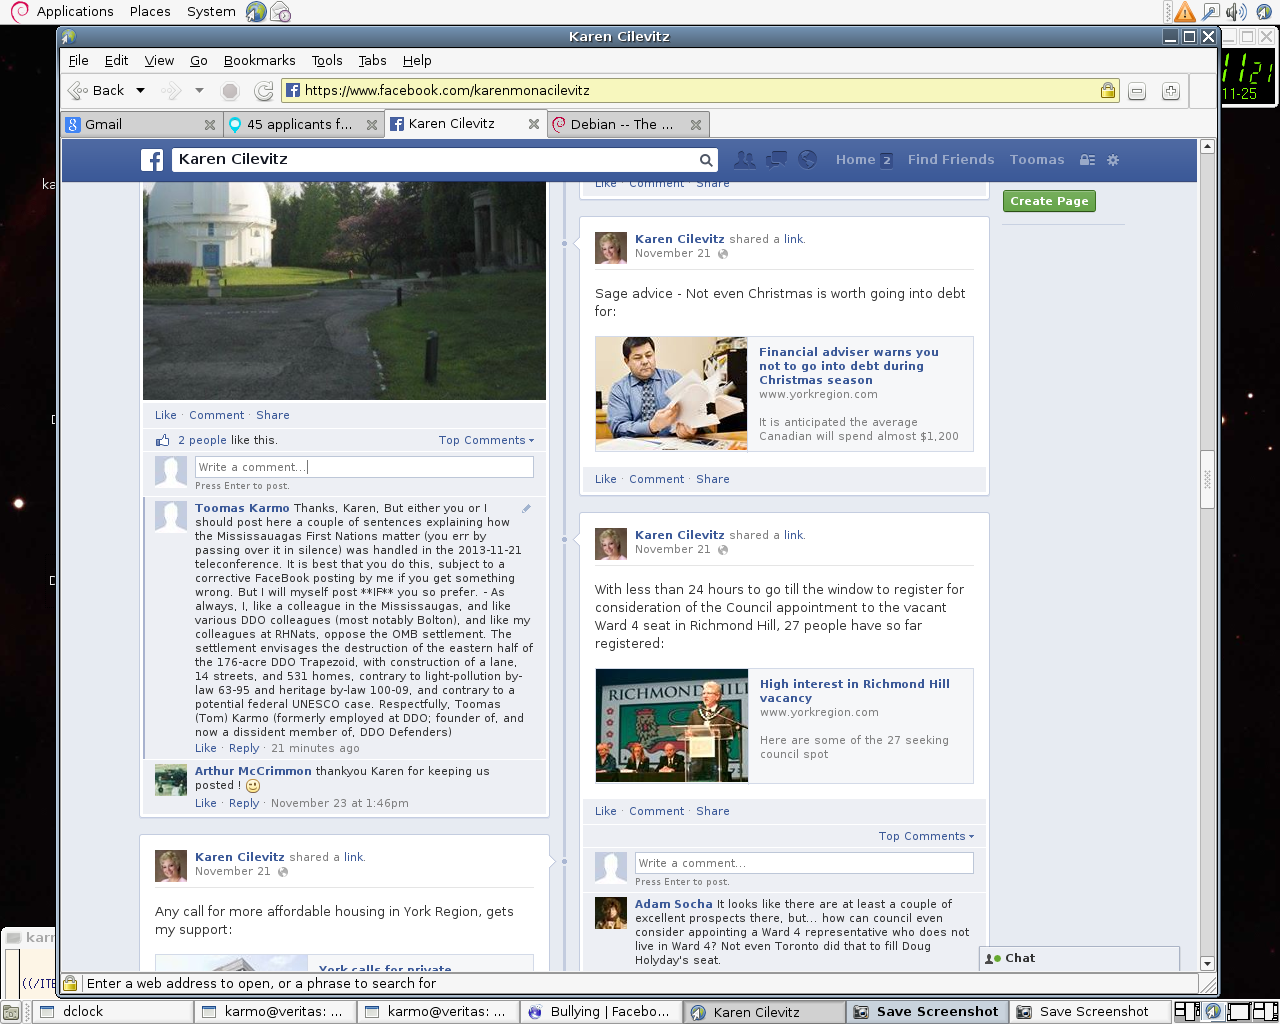 screenshot of Karmo posting
to Cileivtz Facebook, re Mississaugas at OMB